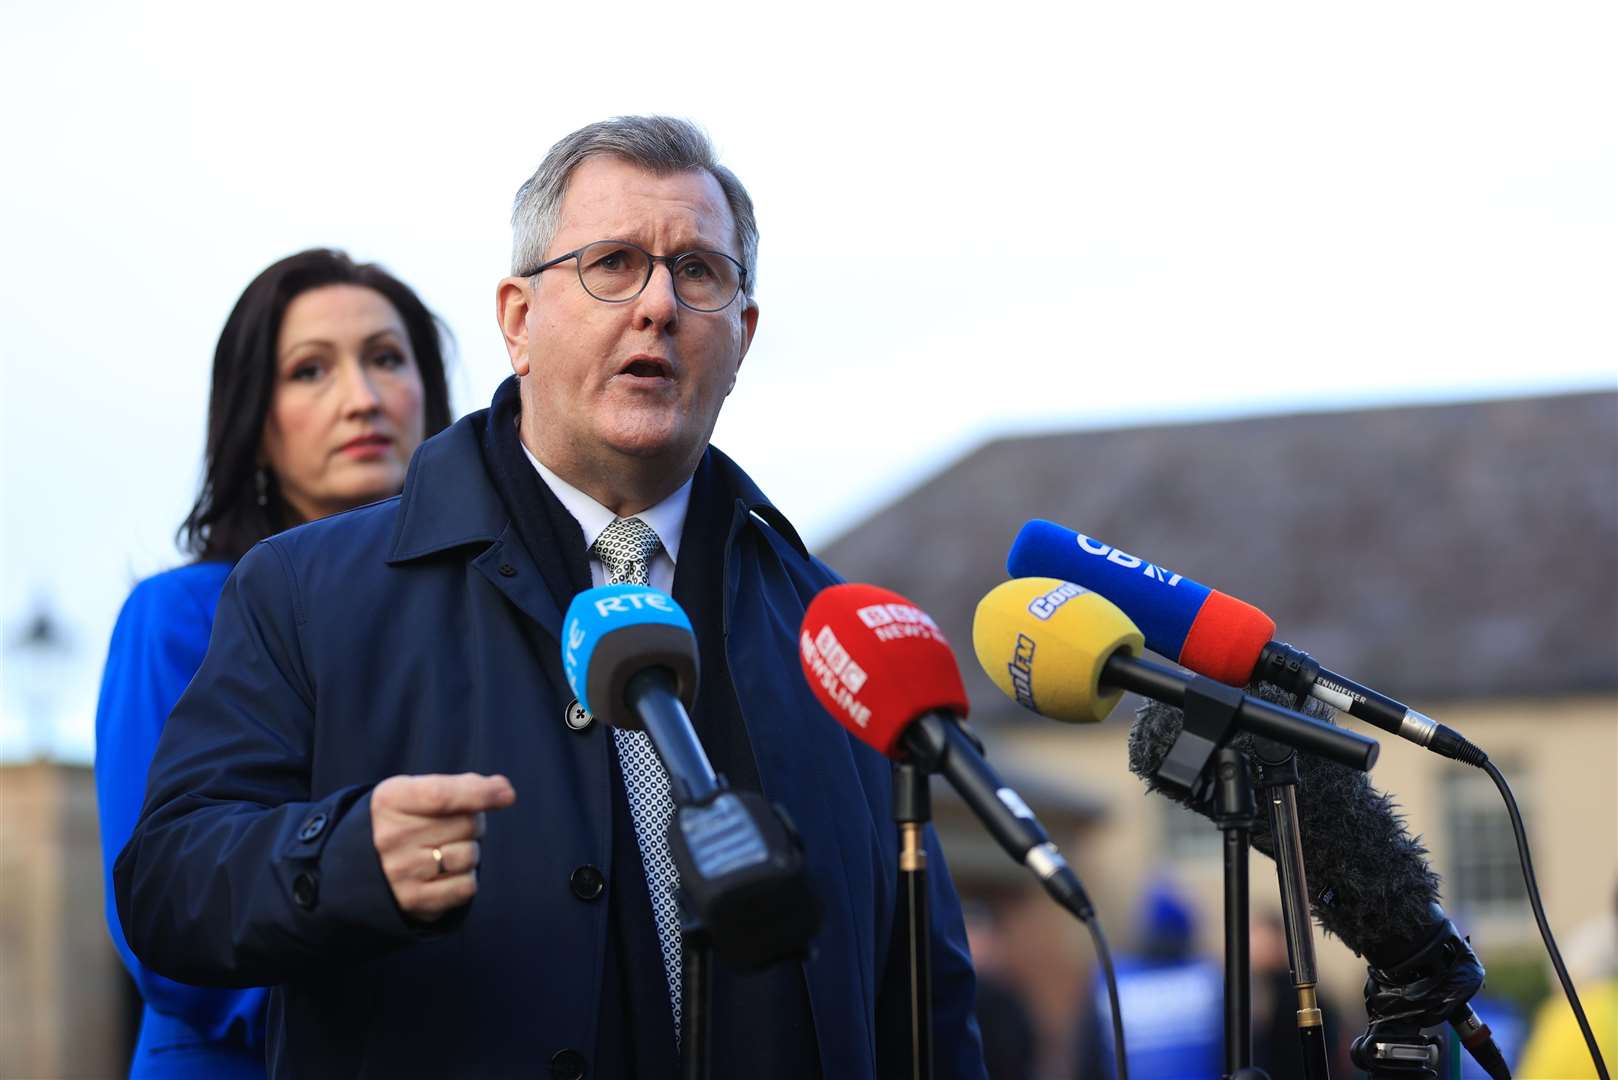 DUP leader Sir Jeffrey Donaldson has said the new UK Government deal will remove all NI/GB checks (Liam McBurney/PA)